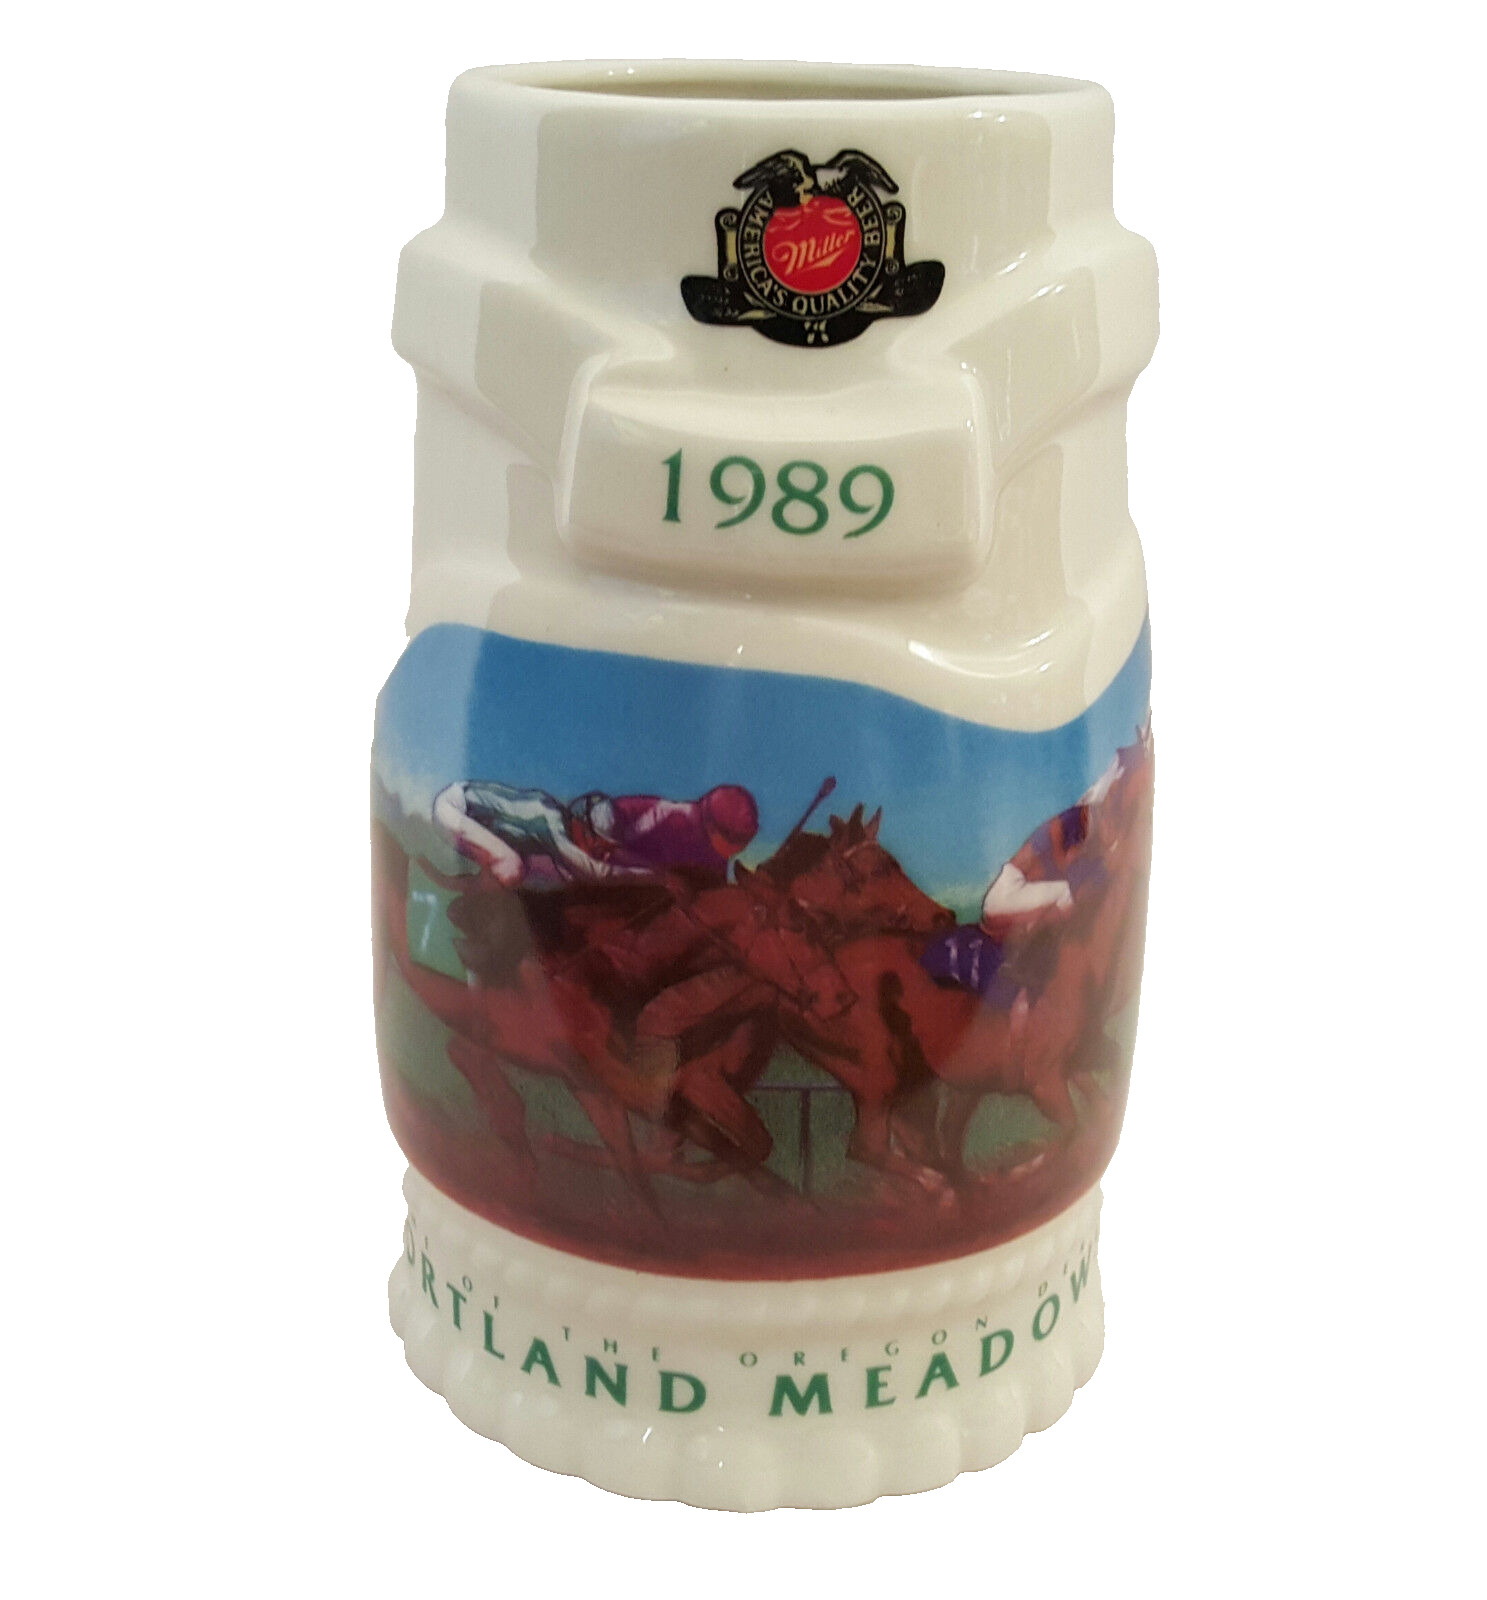 1989 Miller Home of the Oregon Derby Portland Meadows Limited Edition Stein